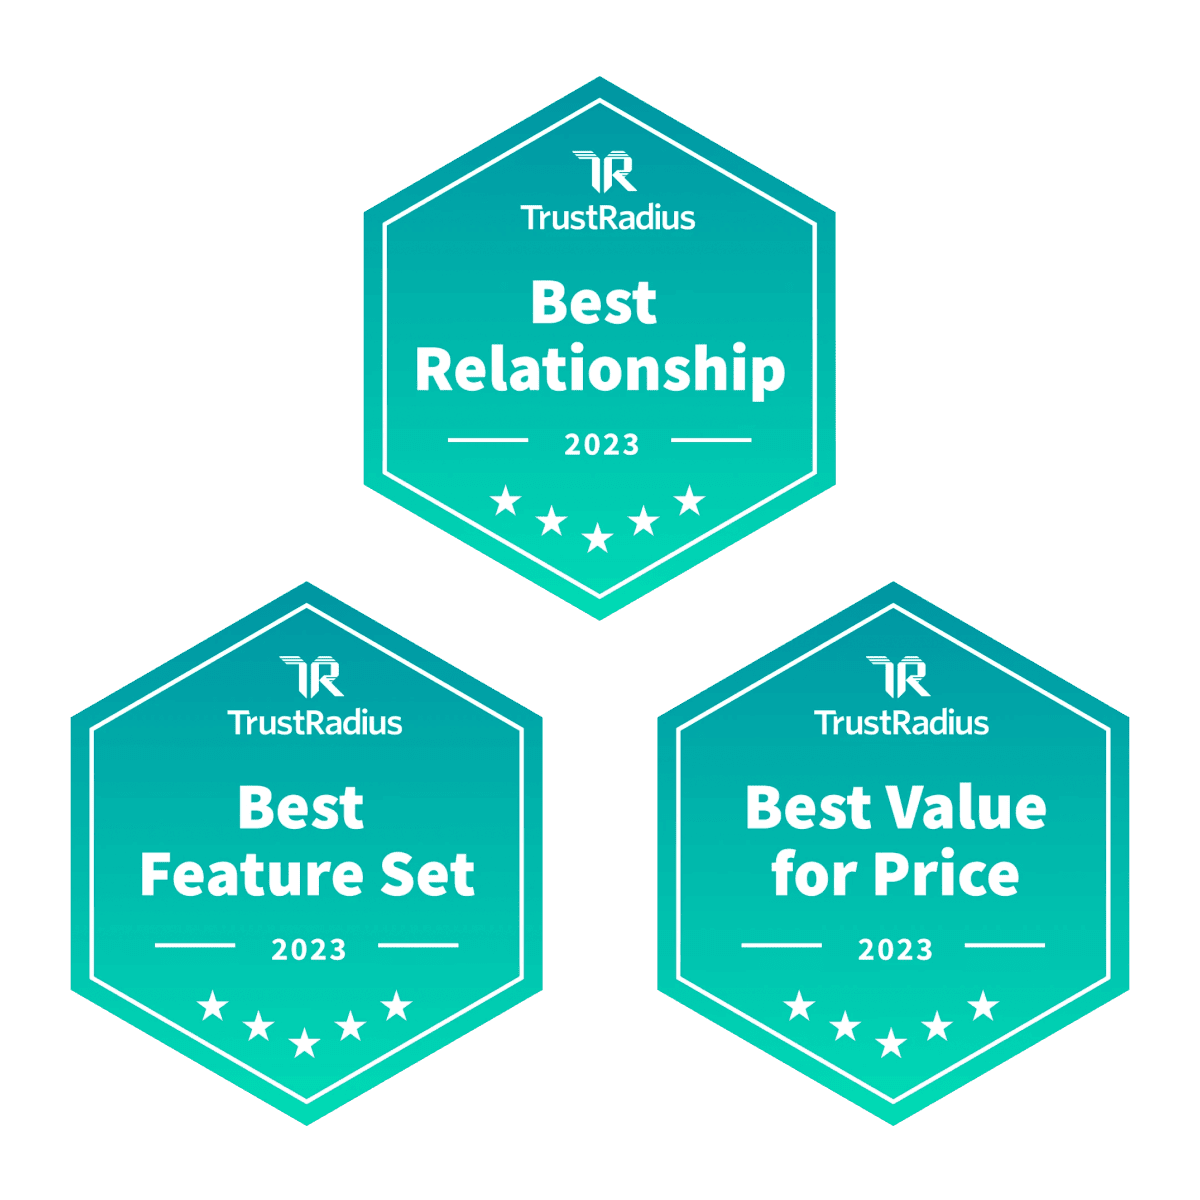 TrustRadius 2023 “Best of” awards including Best Relationship, Best Feature Set, Best Value for Price